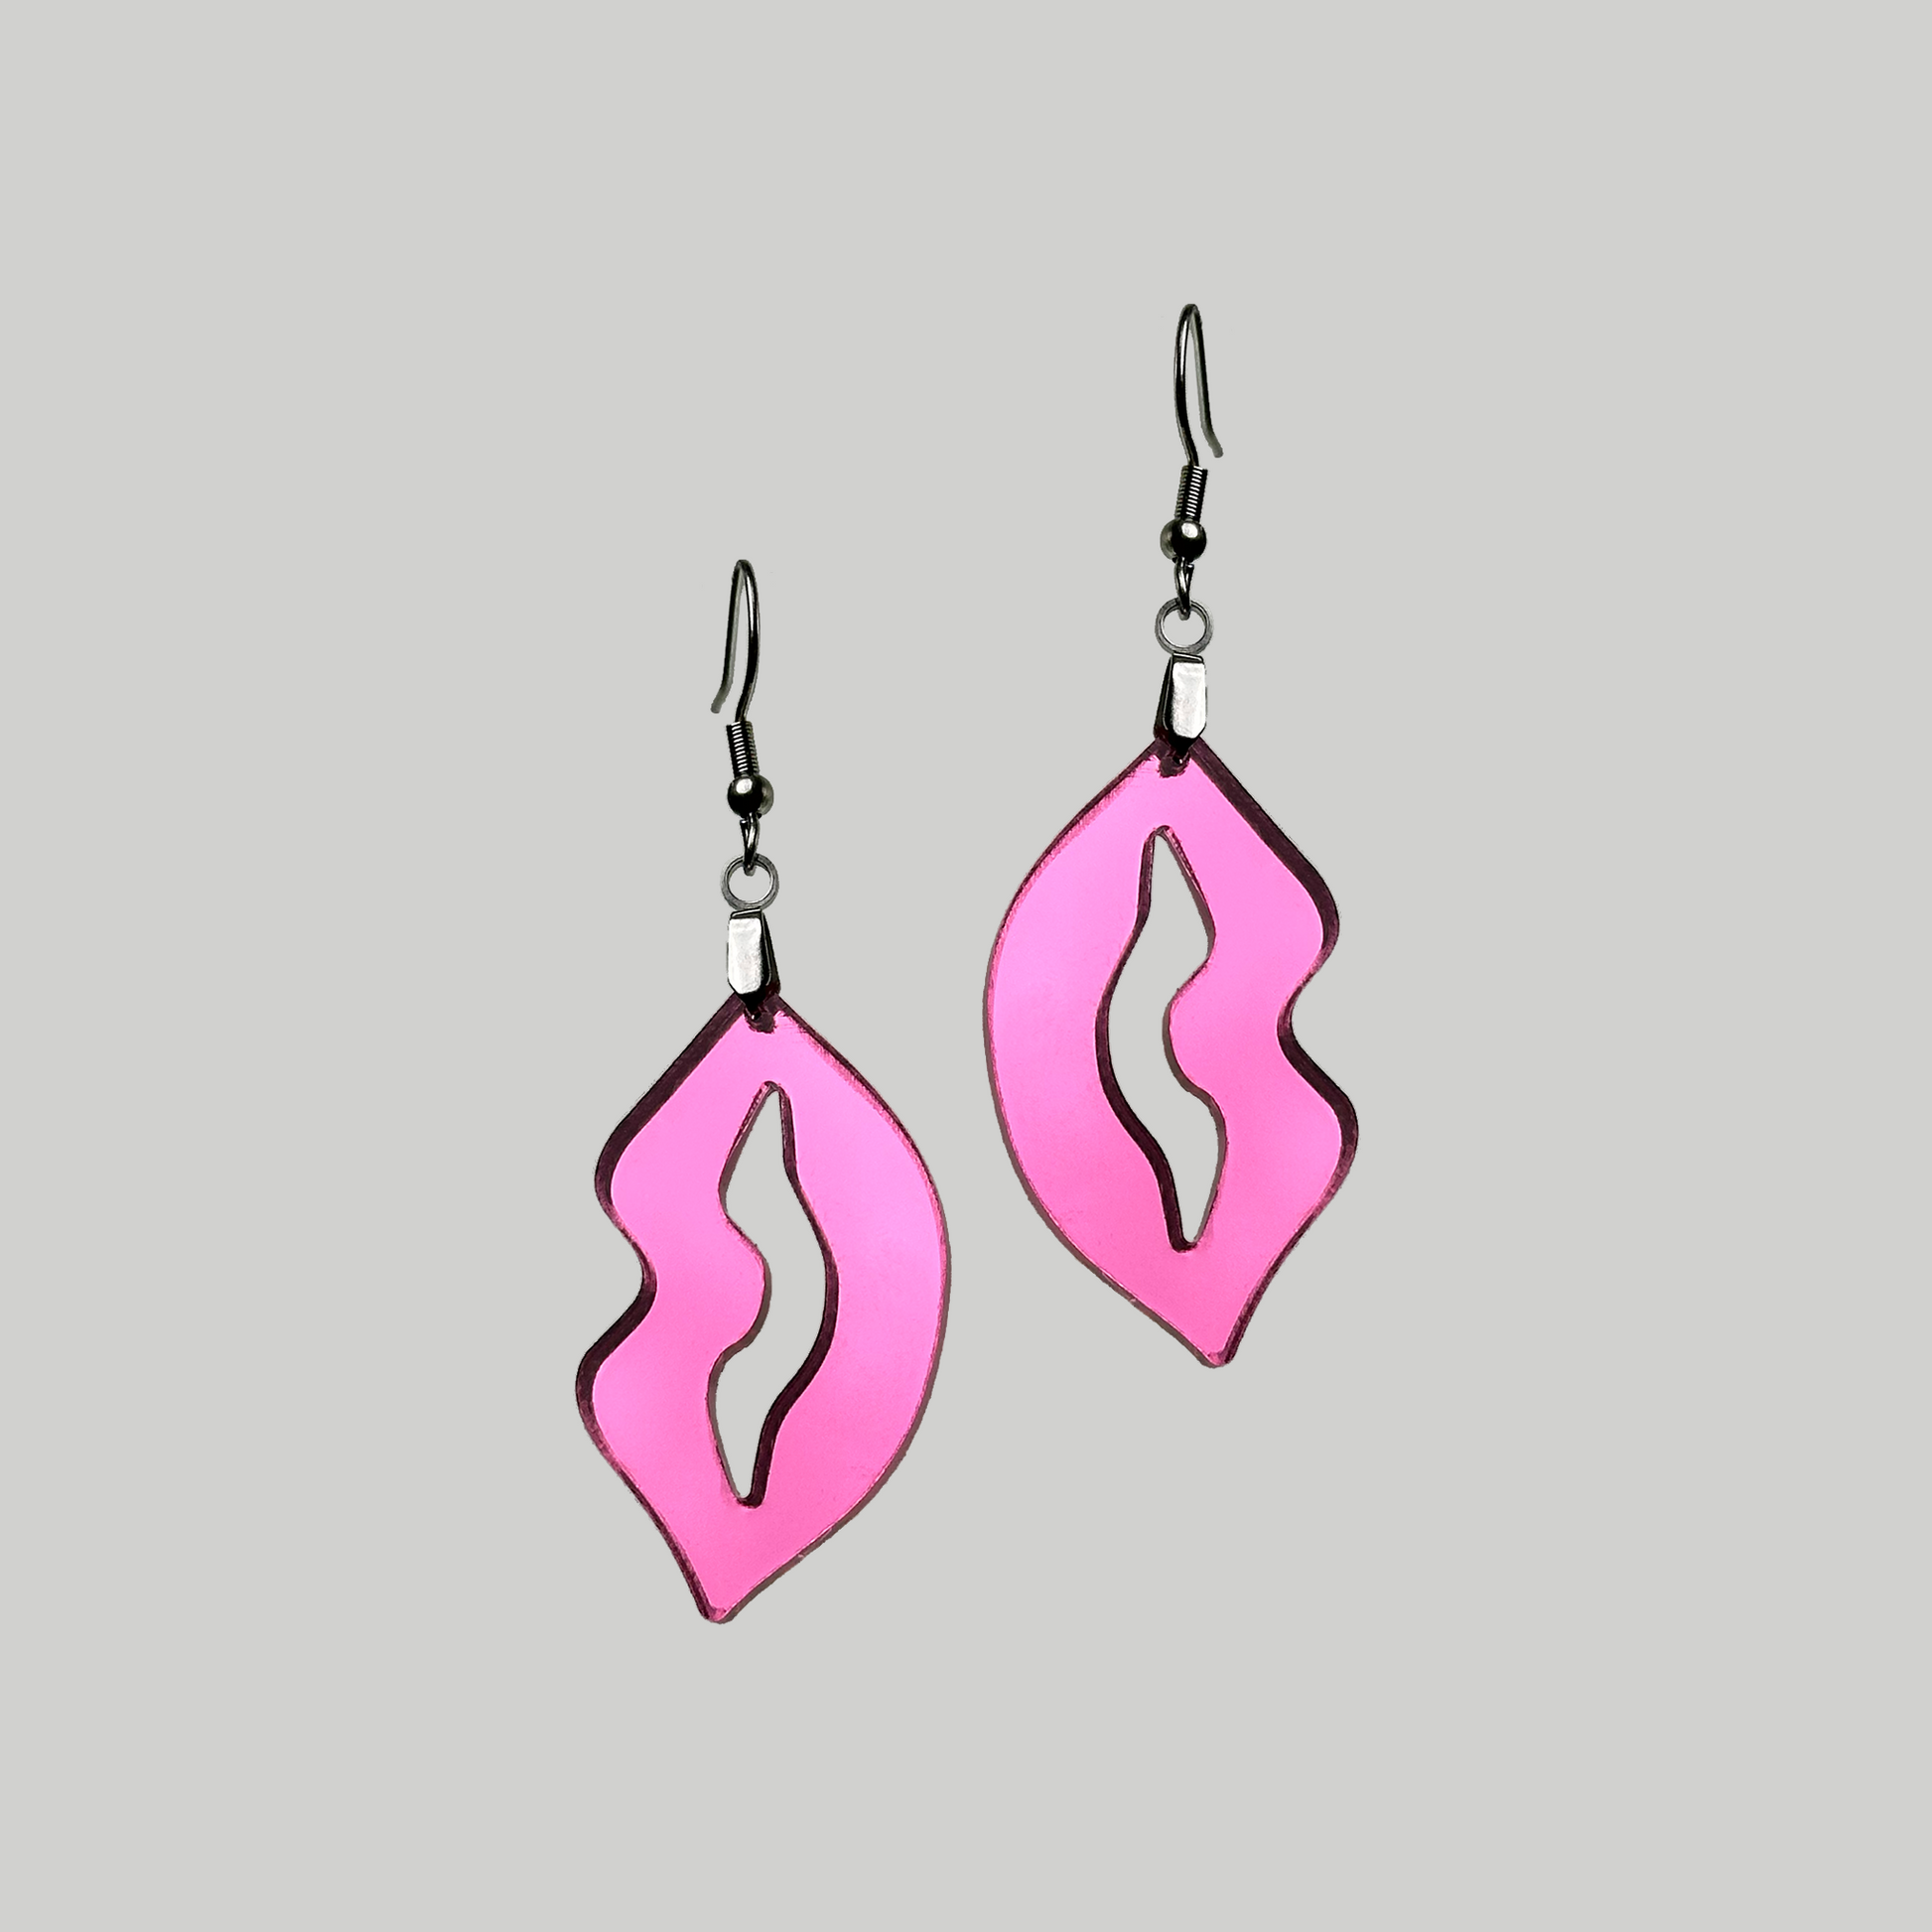 Glossy lip-shaped earrings with a sleek outline, perfect for making a statement and enhancing your overall look.